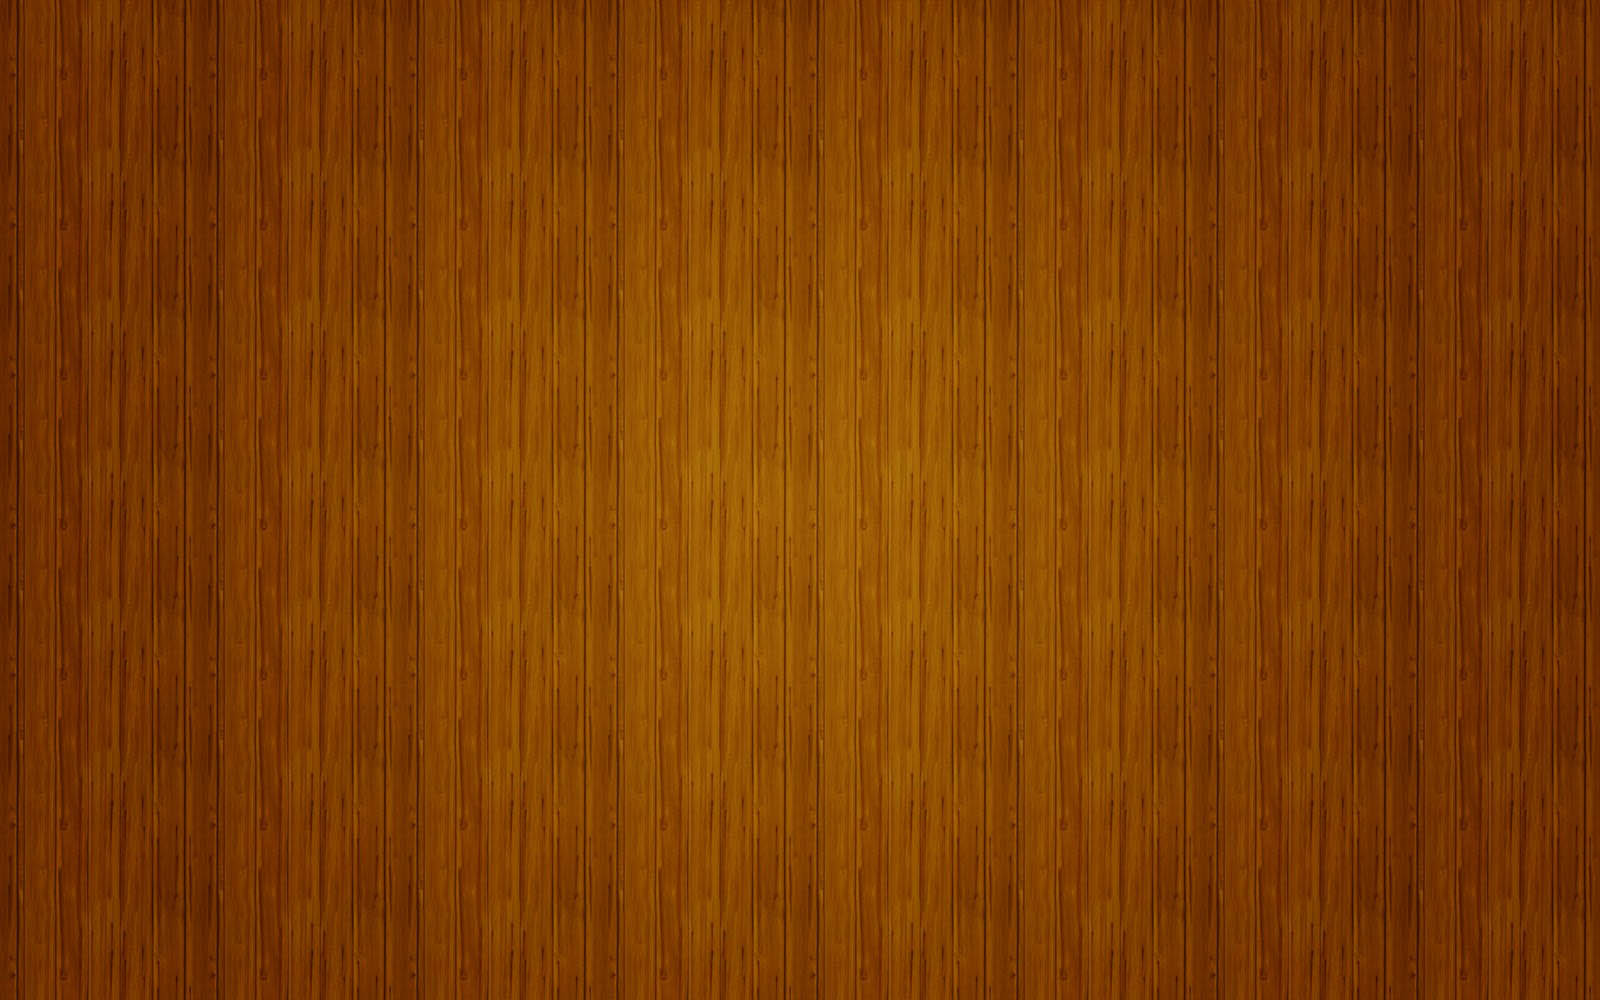  wallpapers  Wood Wallpapers 